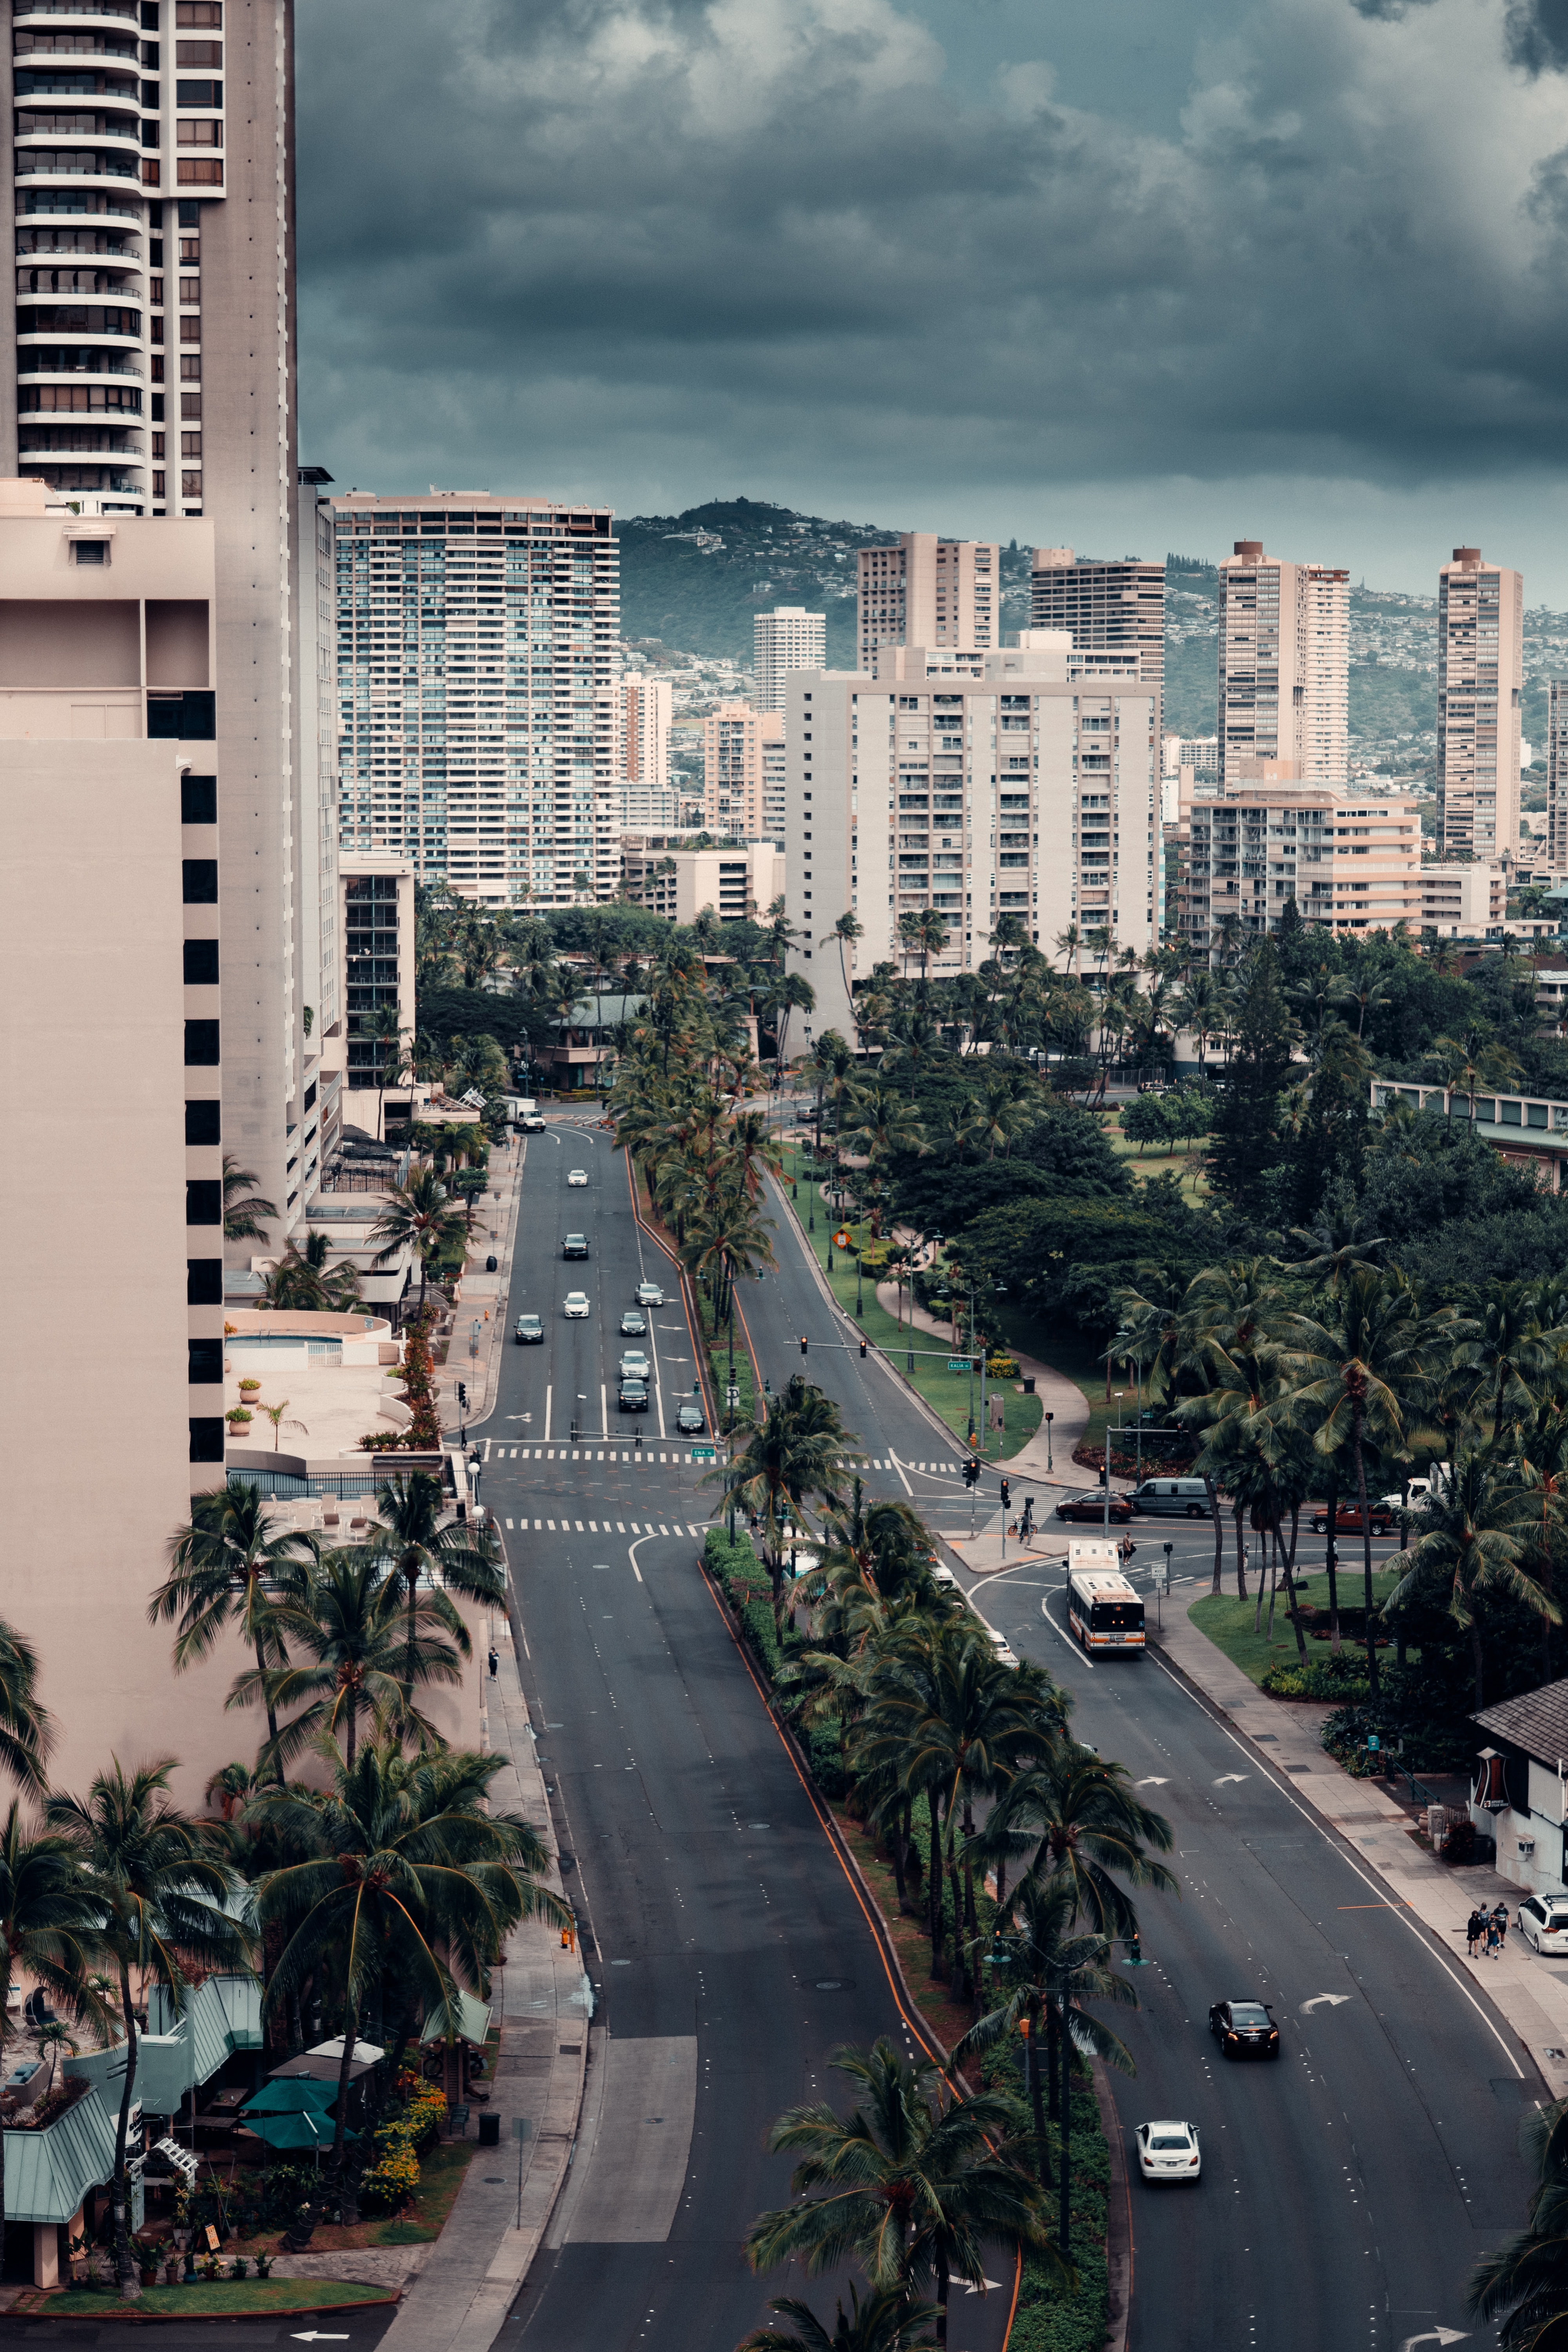 palms, cities, city, building, view from above, road